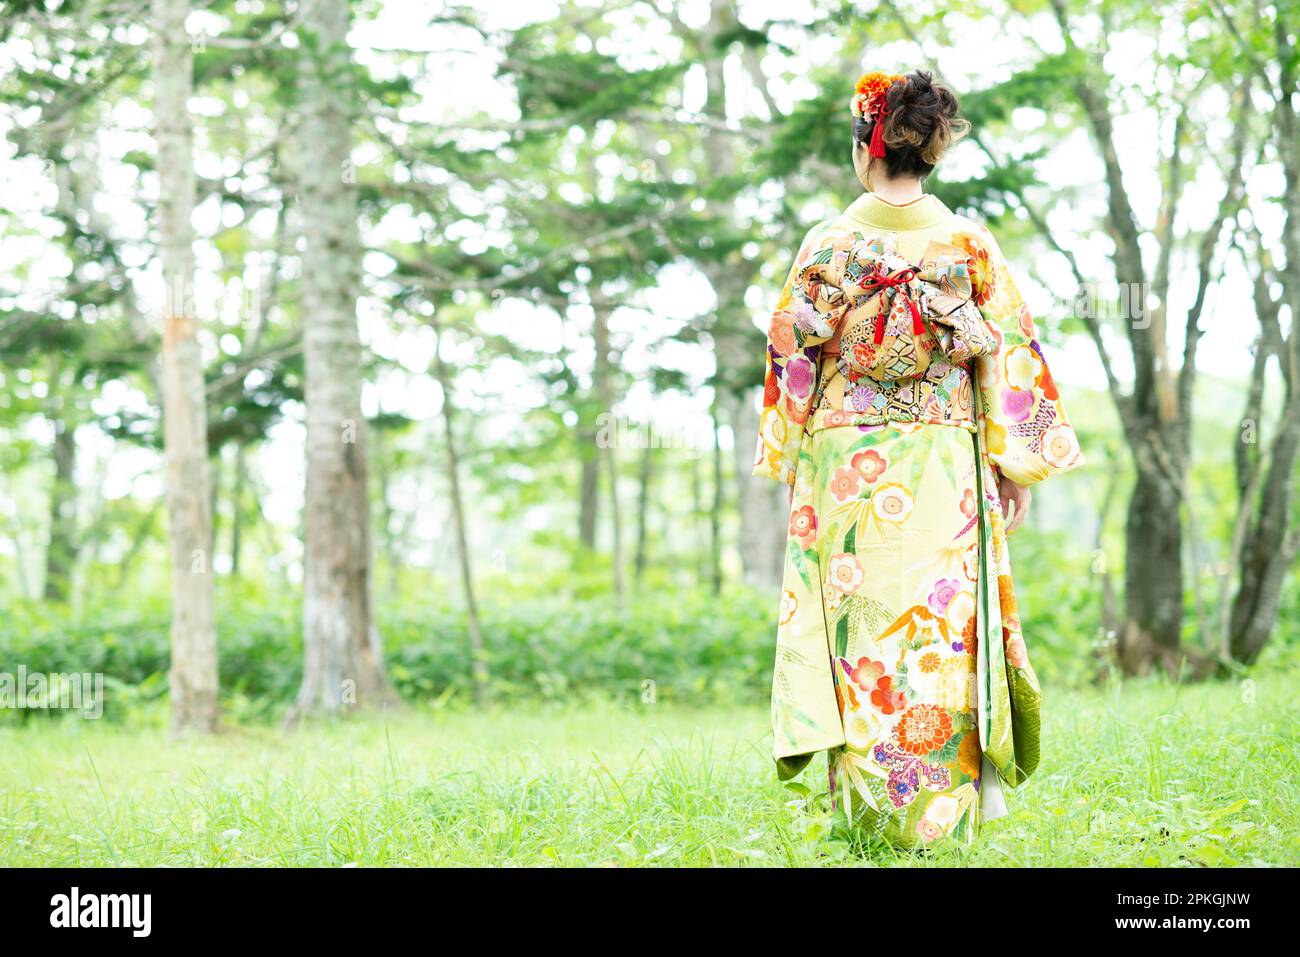 Rear view of woman in kimono standing in forest Stock Photo